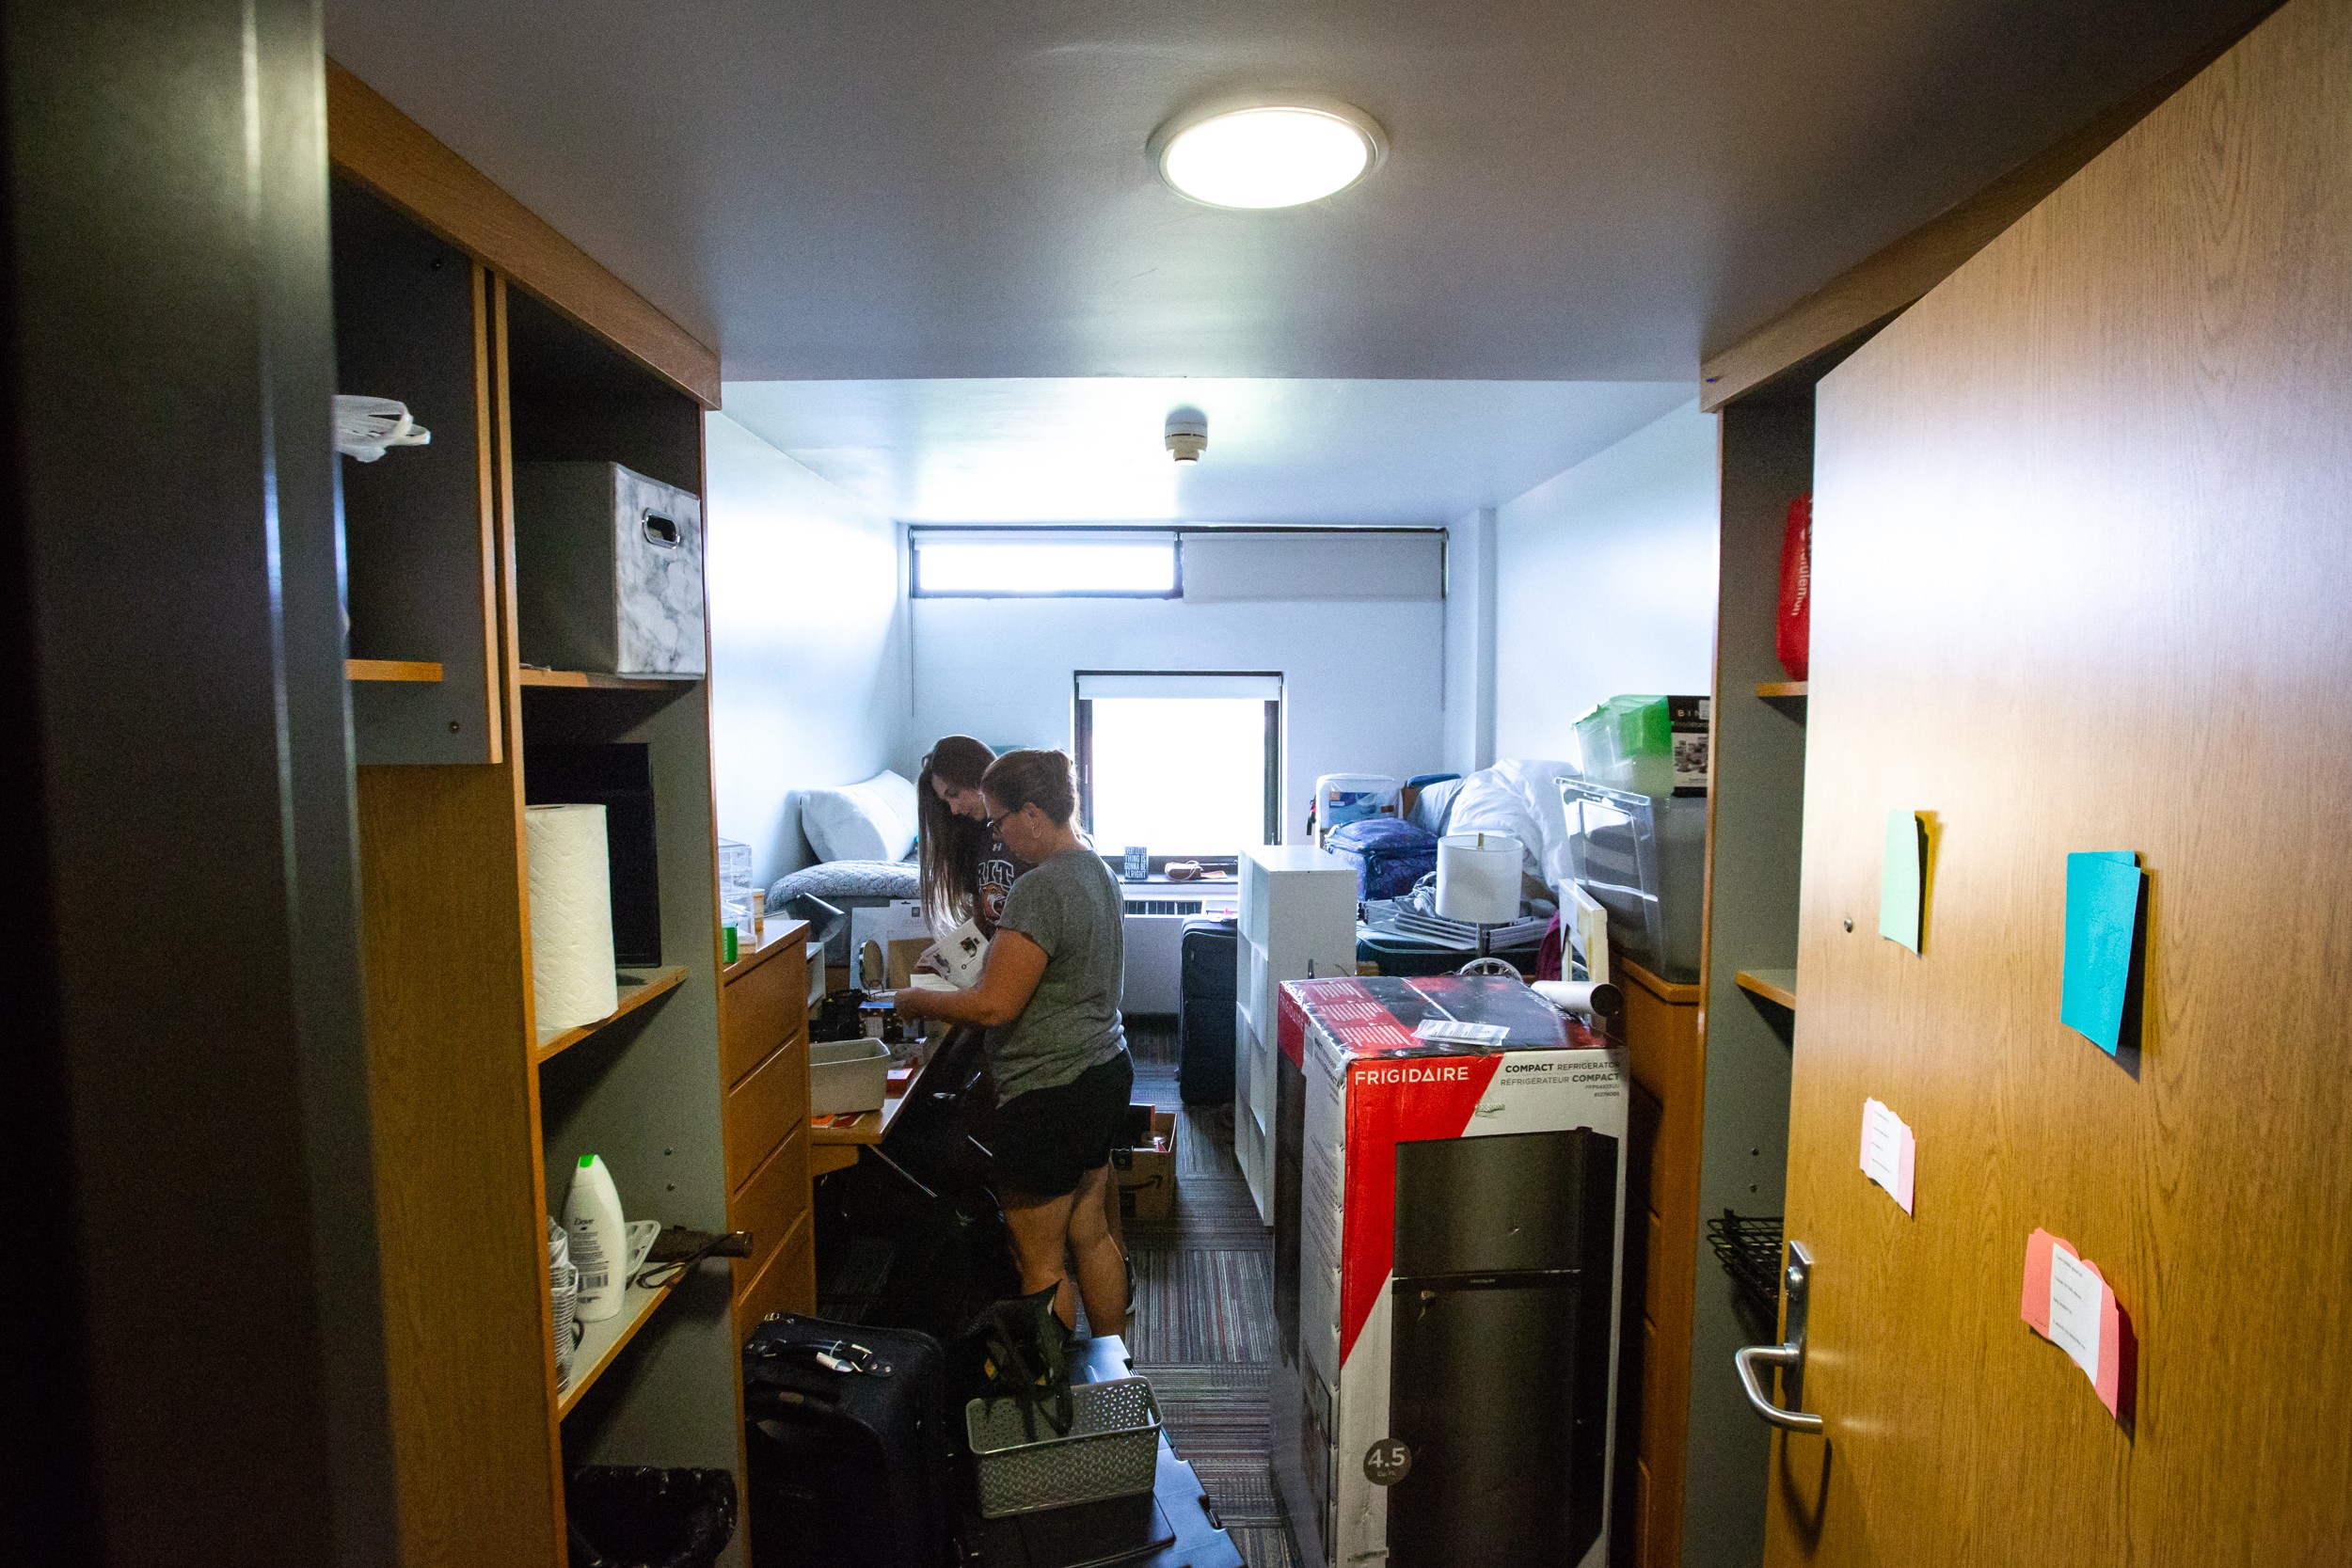 Student unpacking and moving into an RIT dorm room